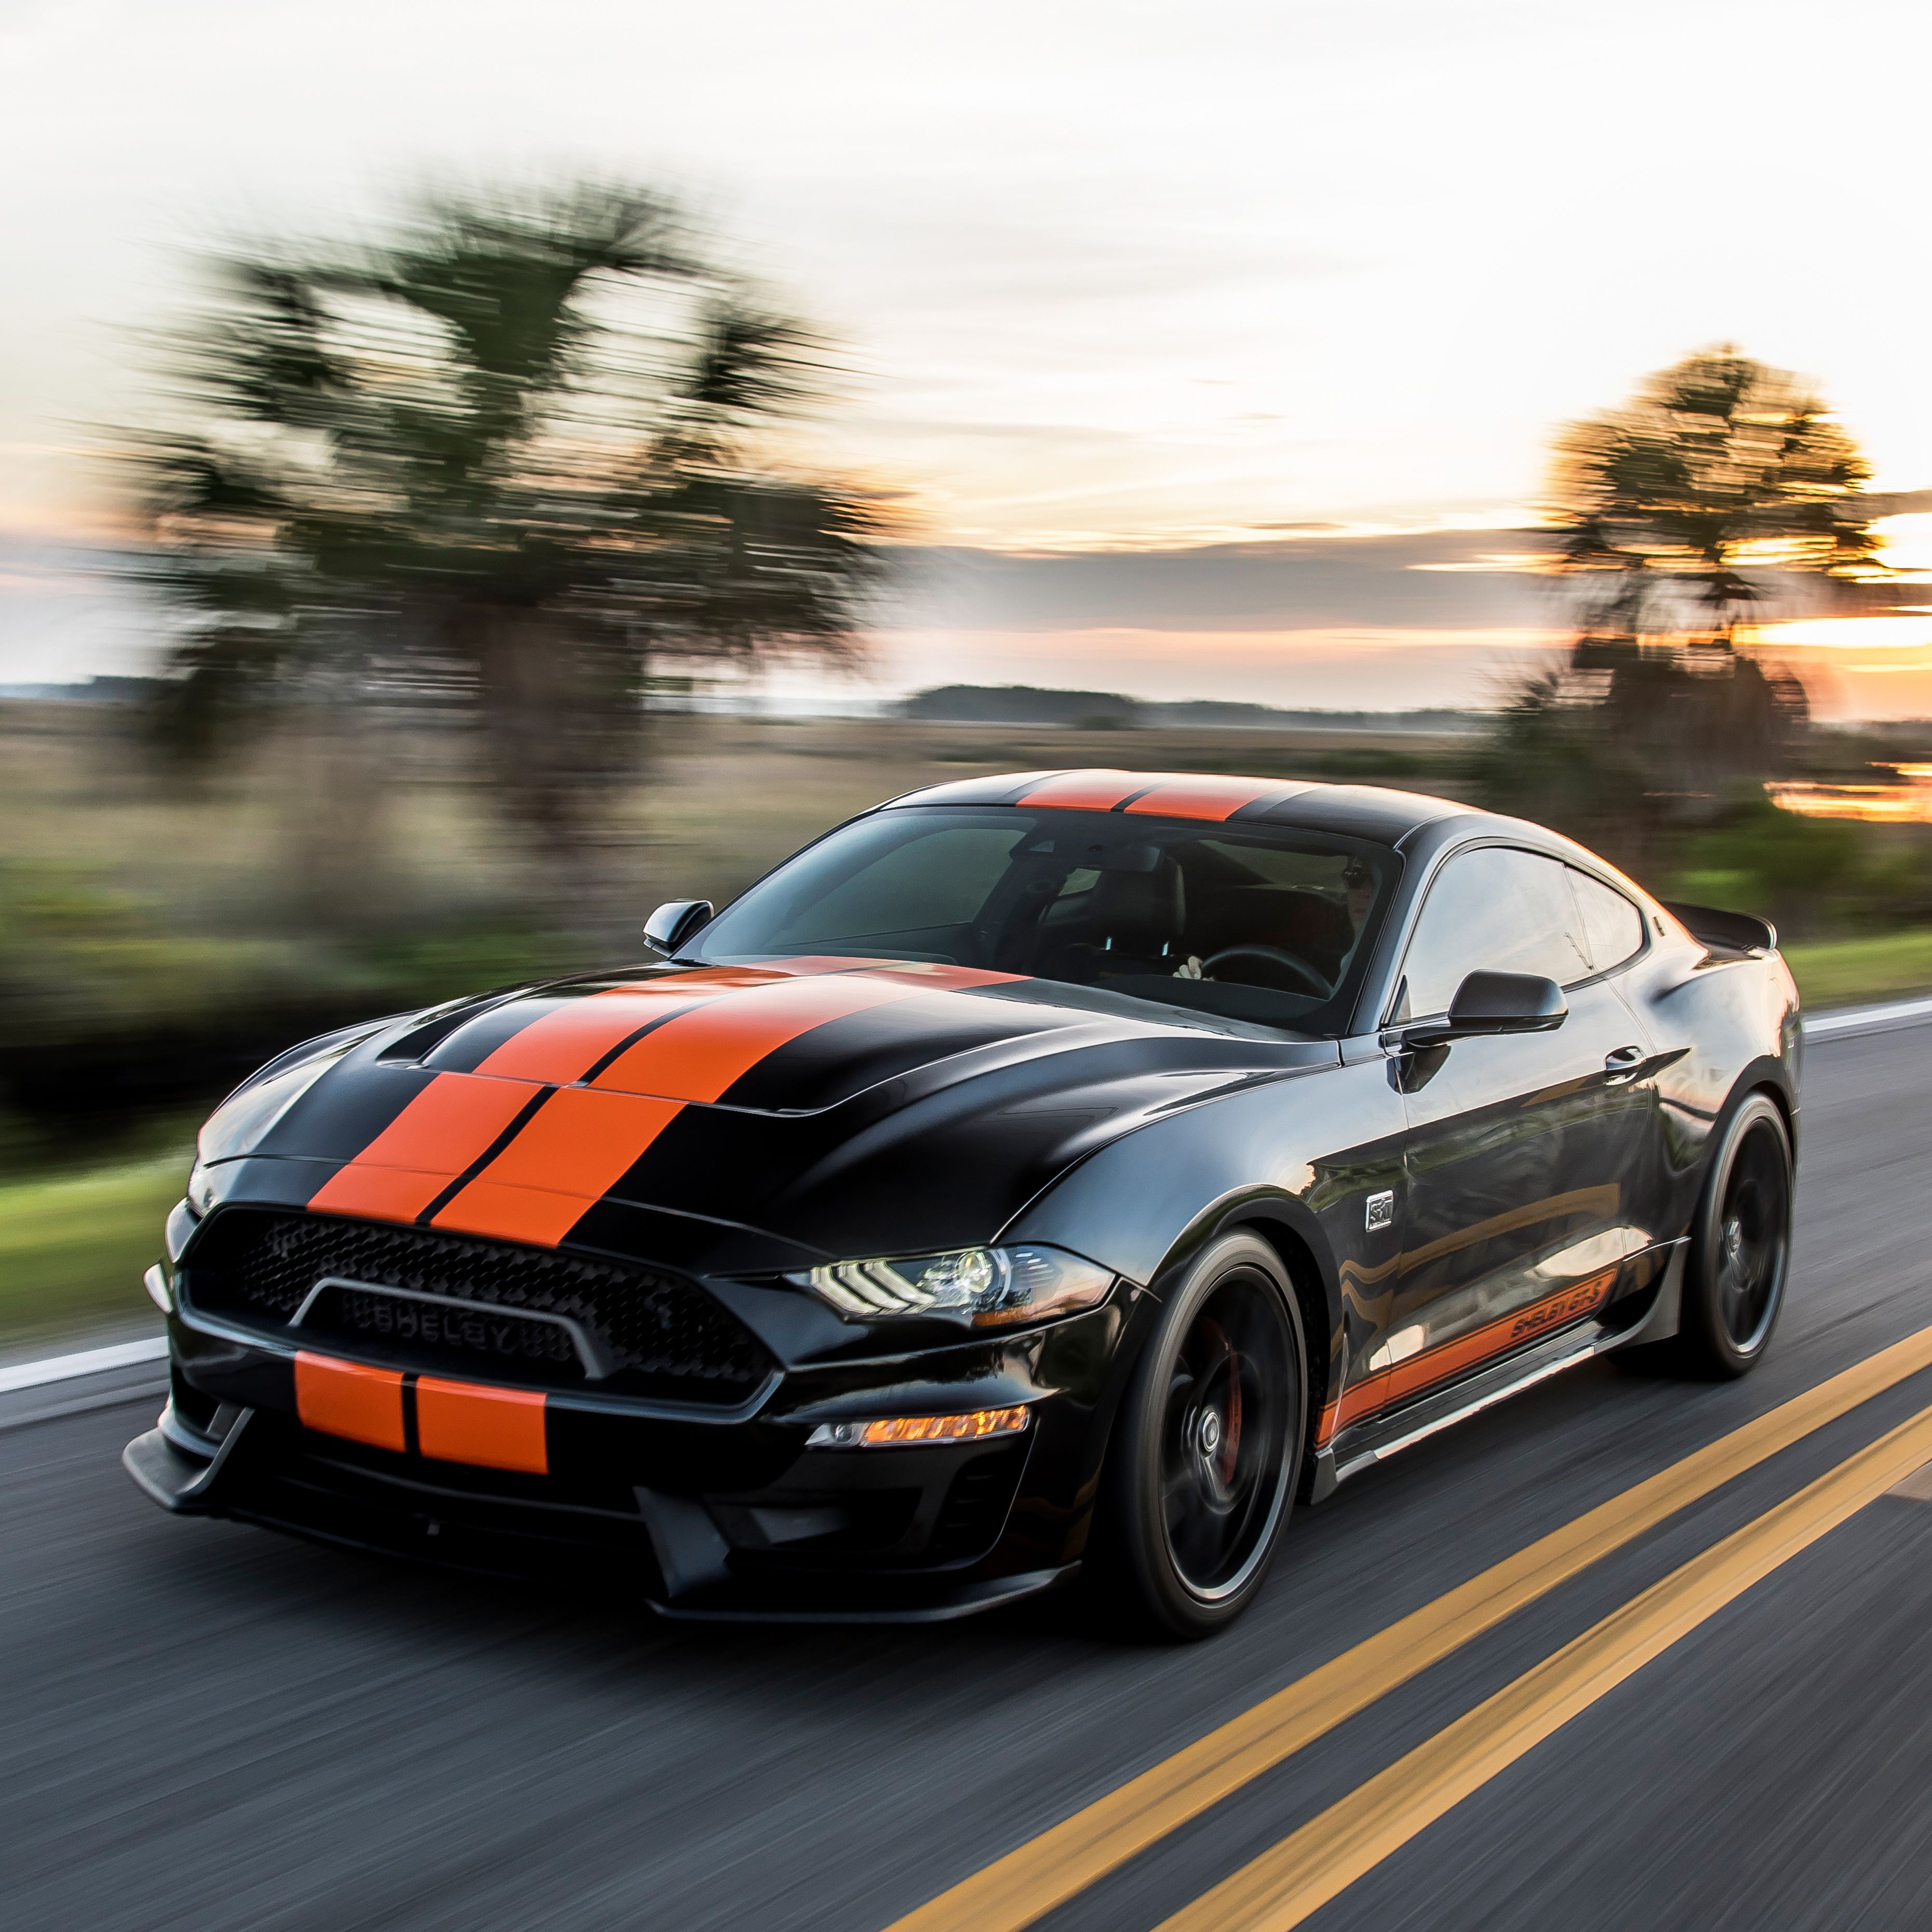 2019 Ford Mustang Shelby Gt-S Is A Rental Car We Can Dig